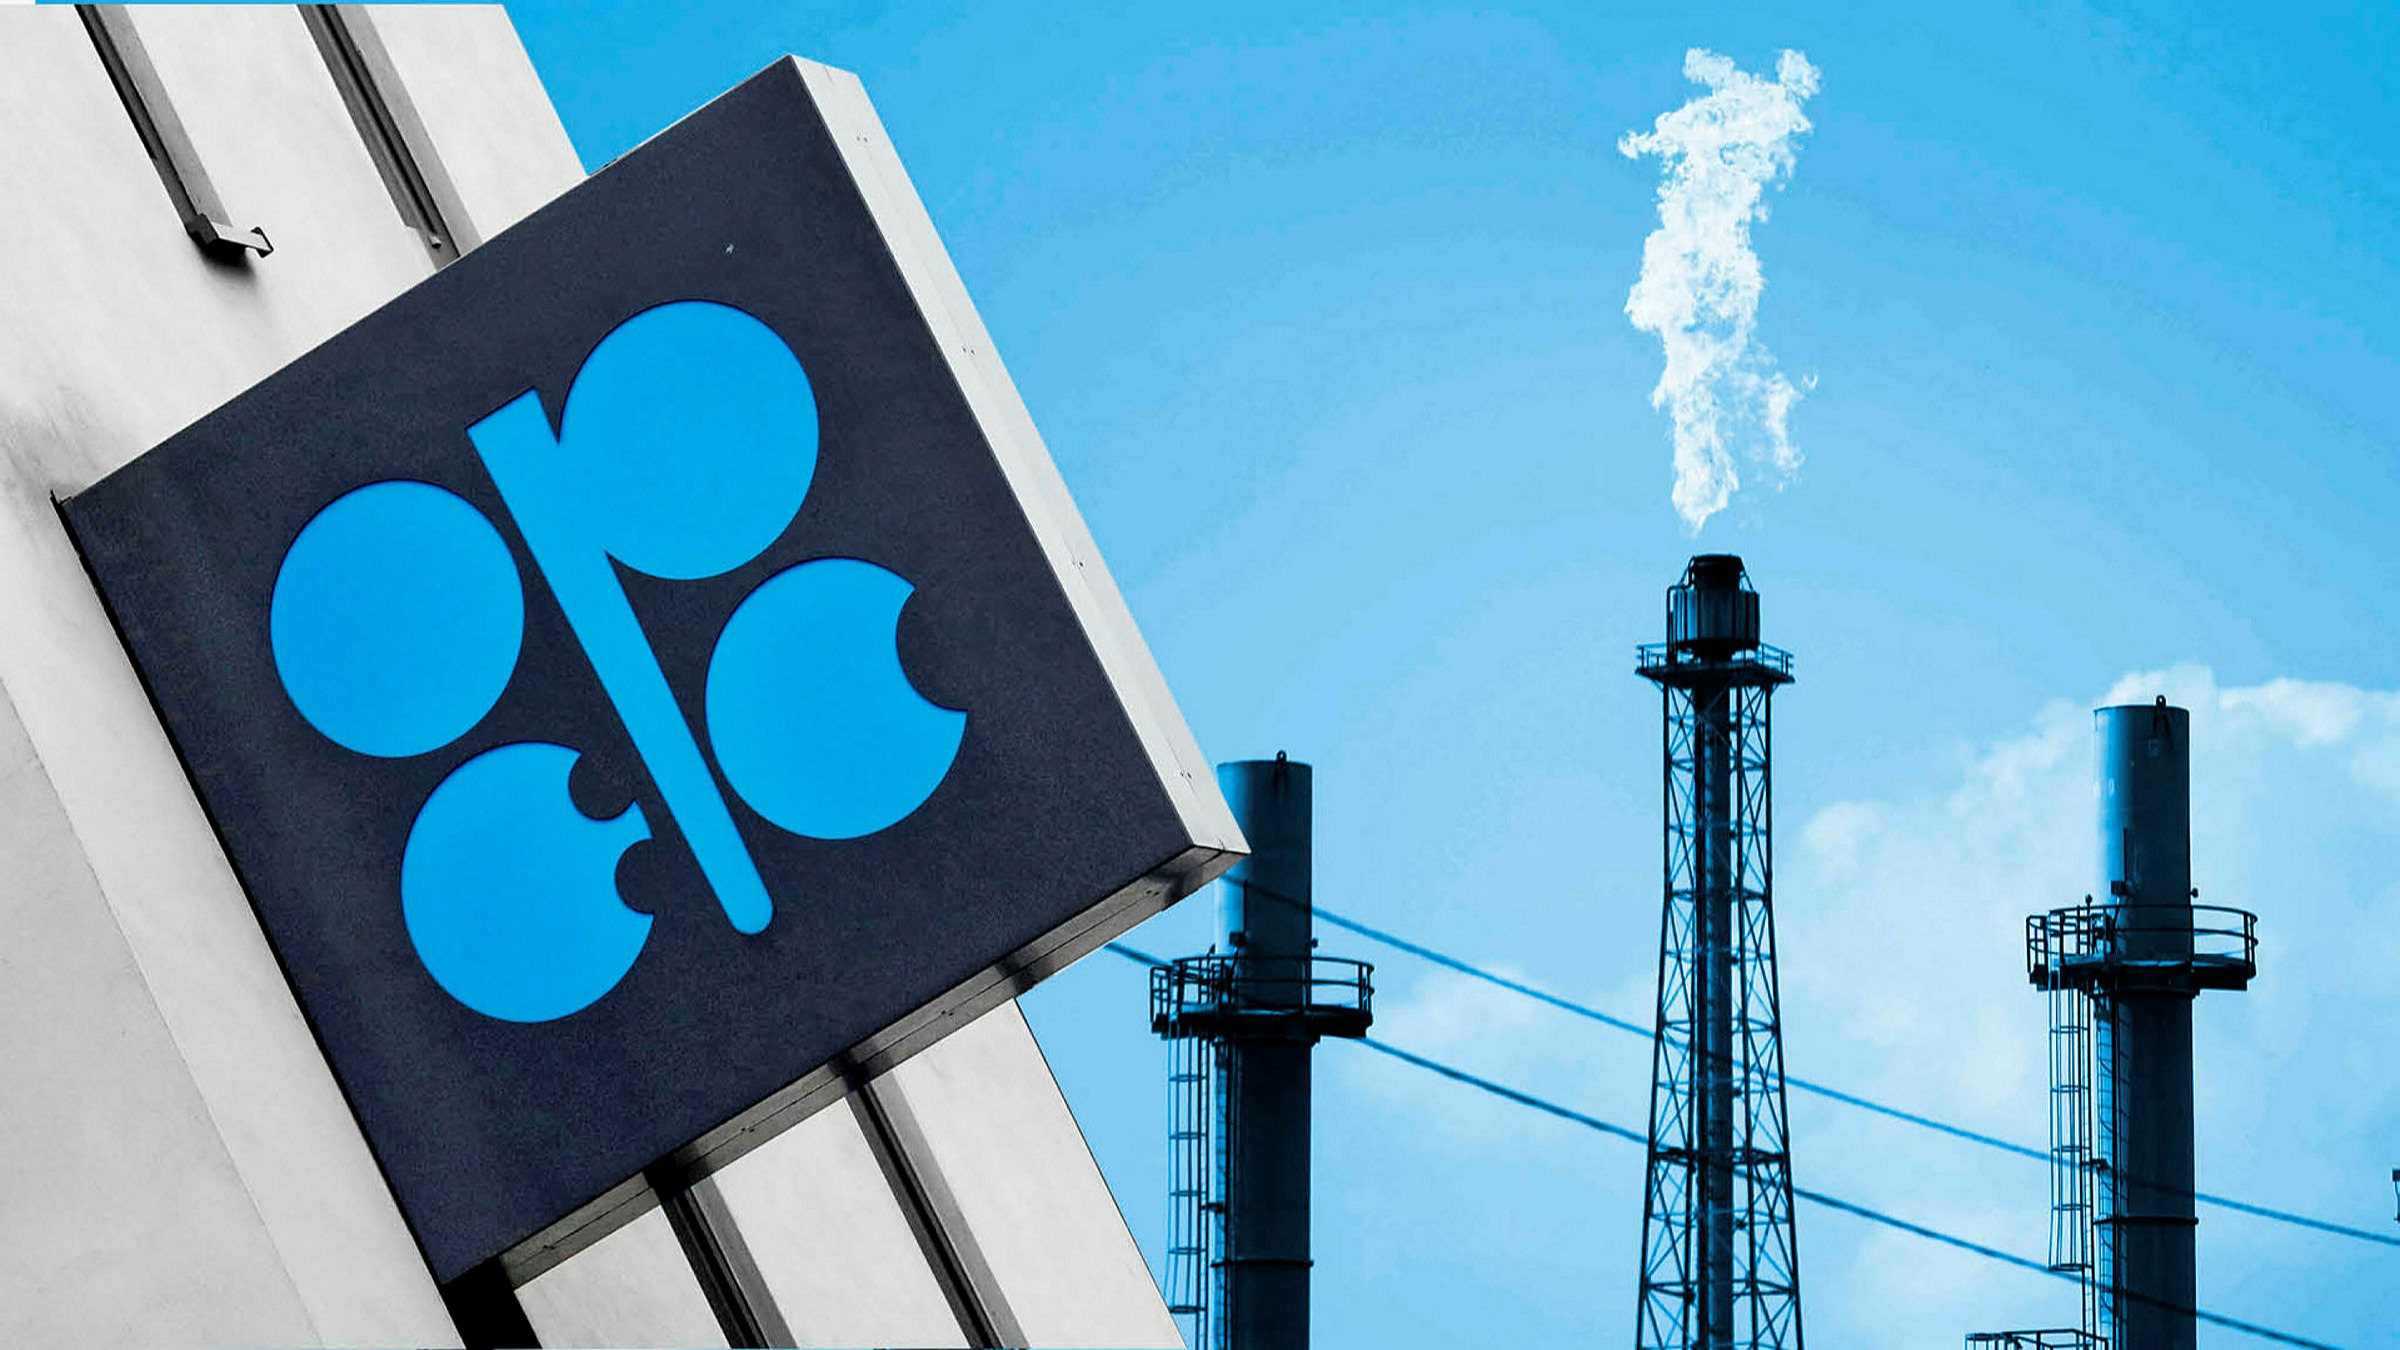 White House says Opec risks imperilling economic recovery | Financial Times